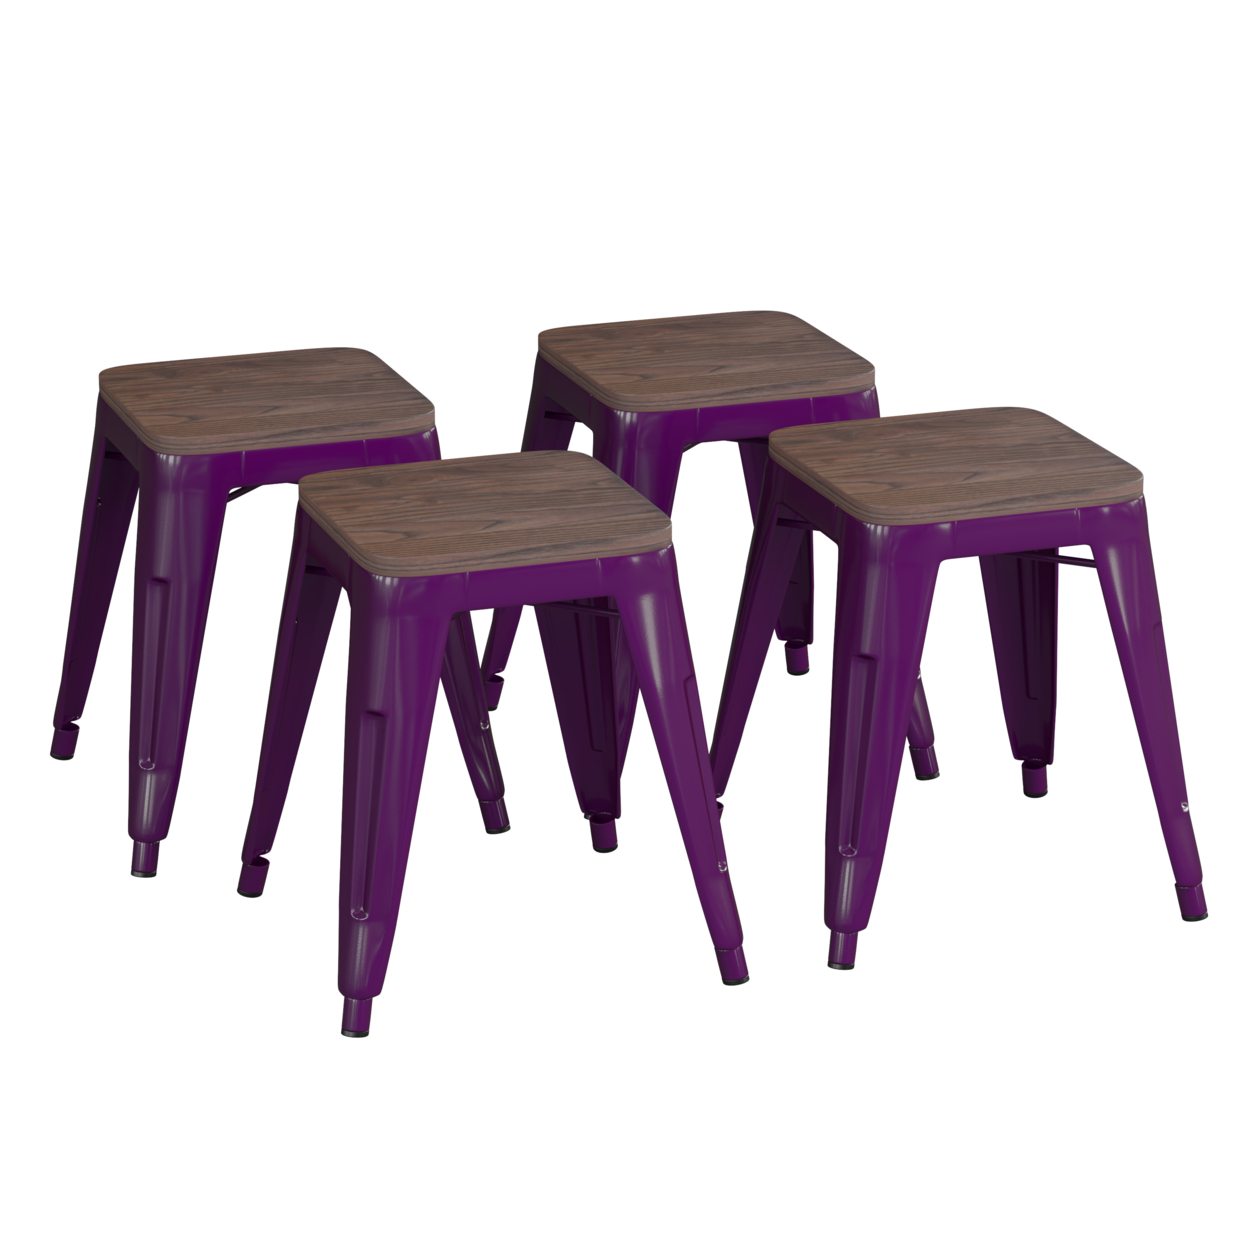 18 Backless Table Height Stool With Wooden Seat, Stackable Purple Metal Indoor Dining Stool, Commercial Grade - Set Of 4